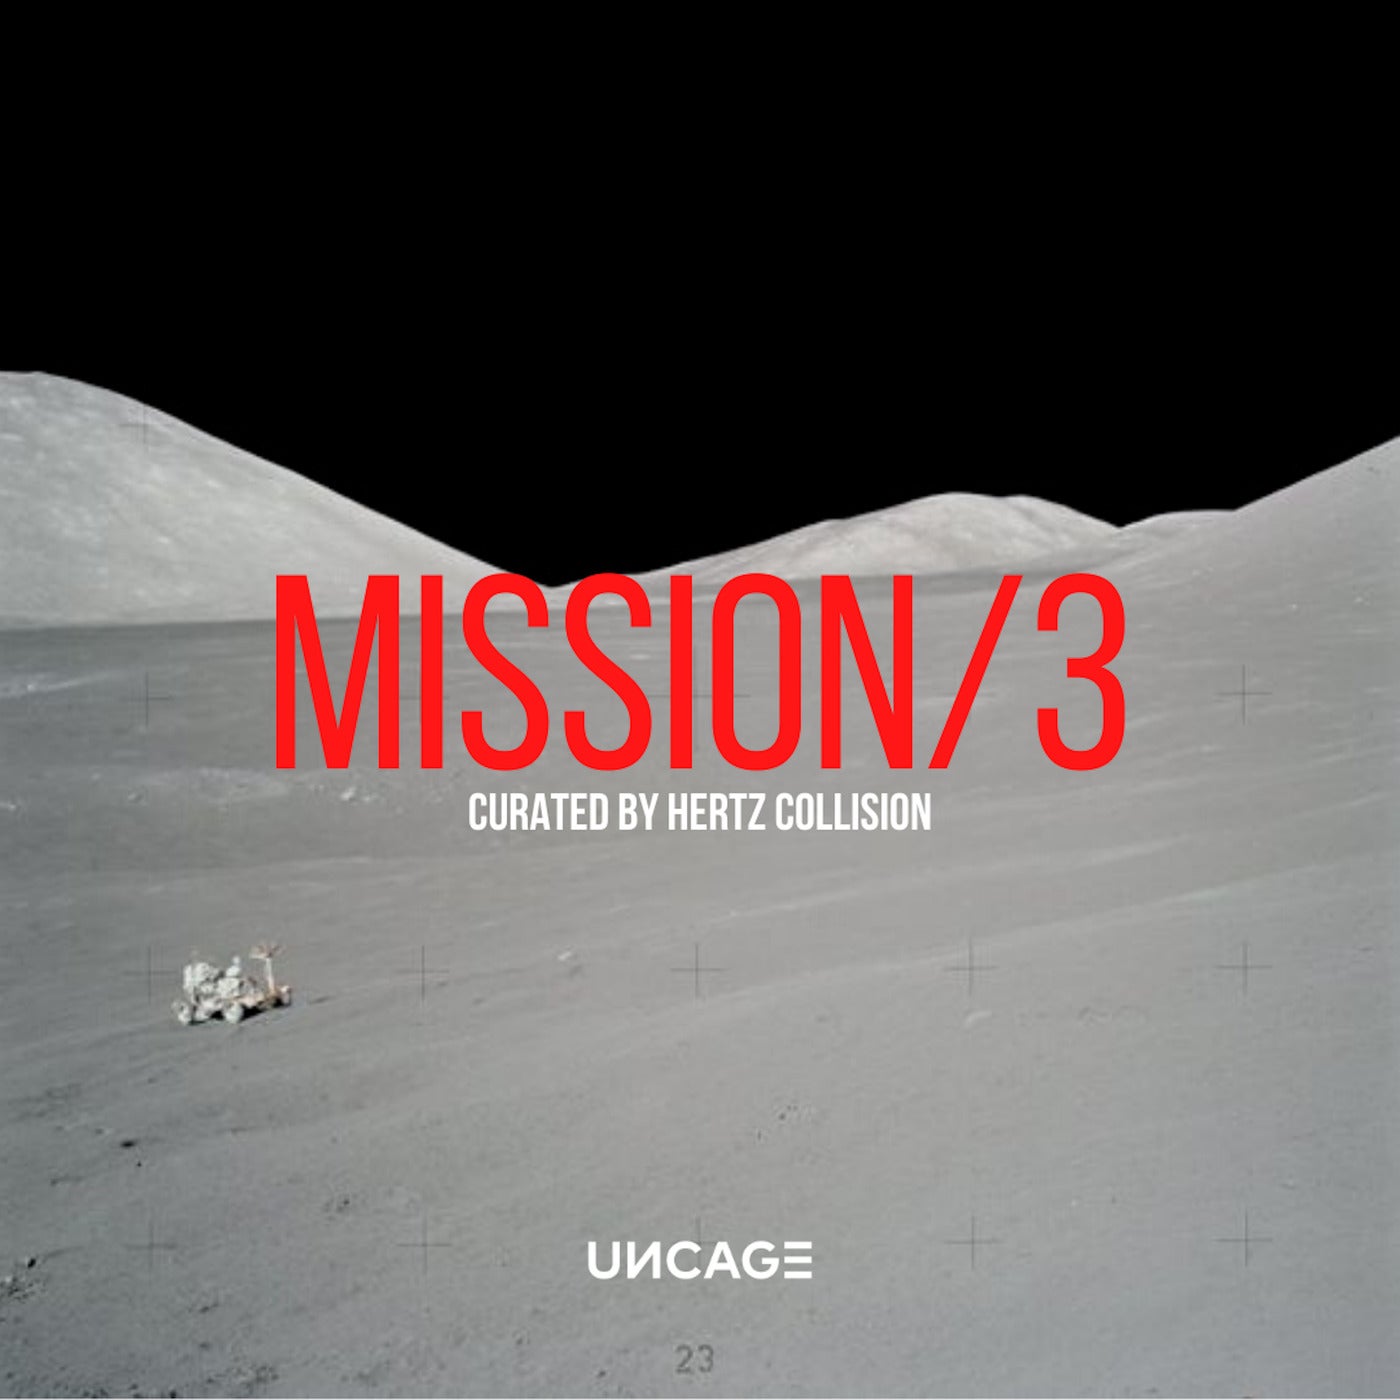 image cover: VA - UNCAGE MISSION 03 (Curated by Hertz Collision) / UNCAGEMISSION03